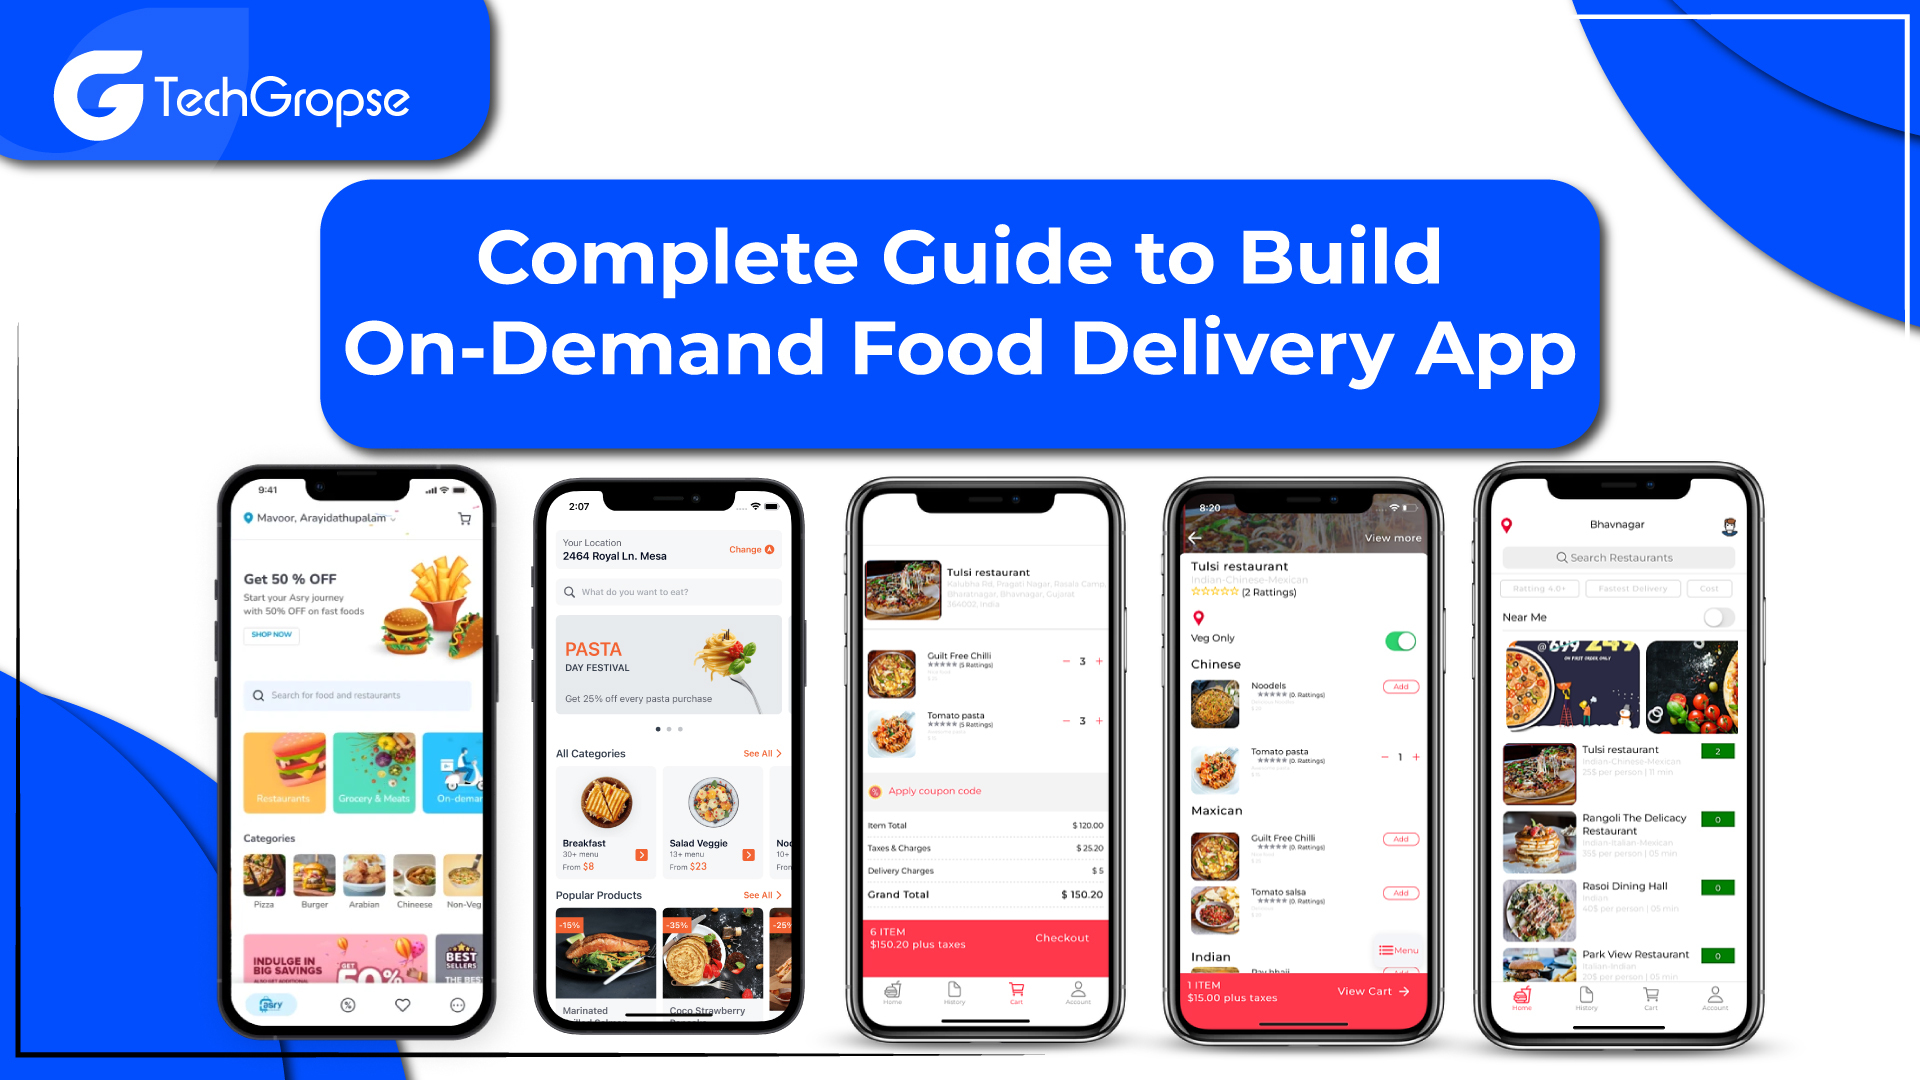 Complete Guide to Build On-Demand Food Delivery App